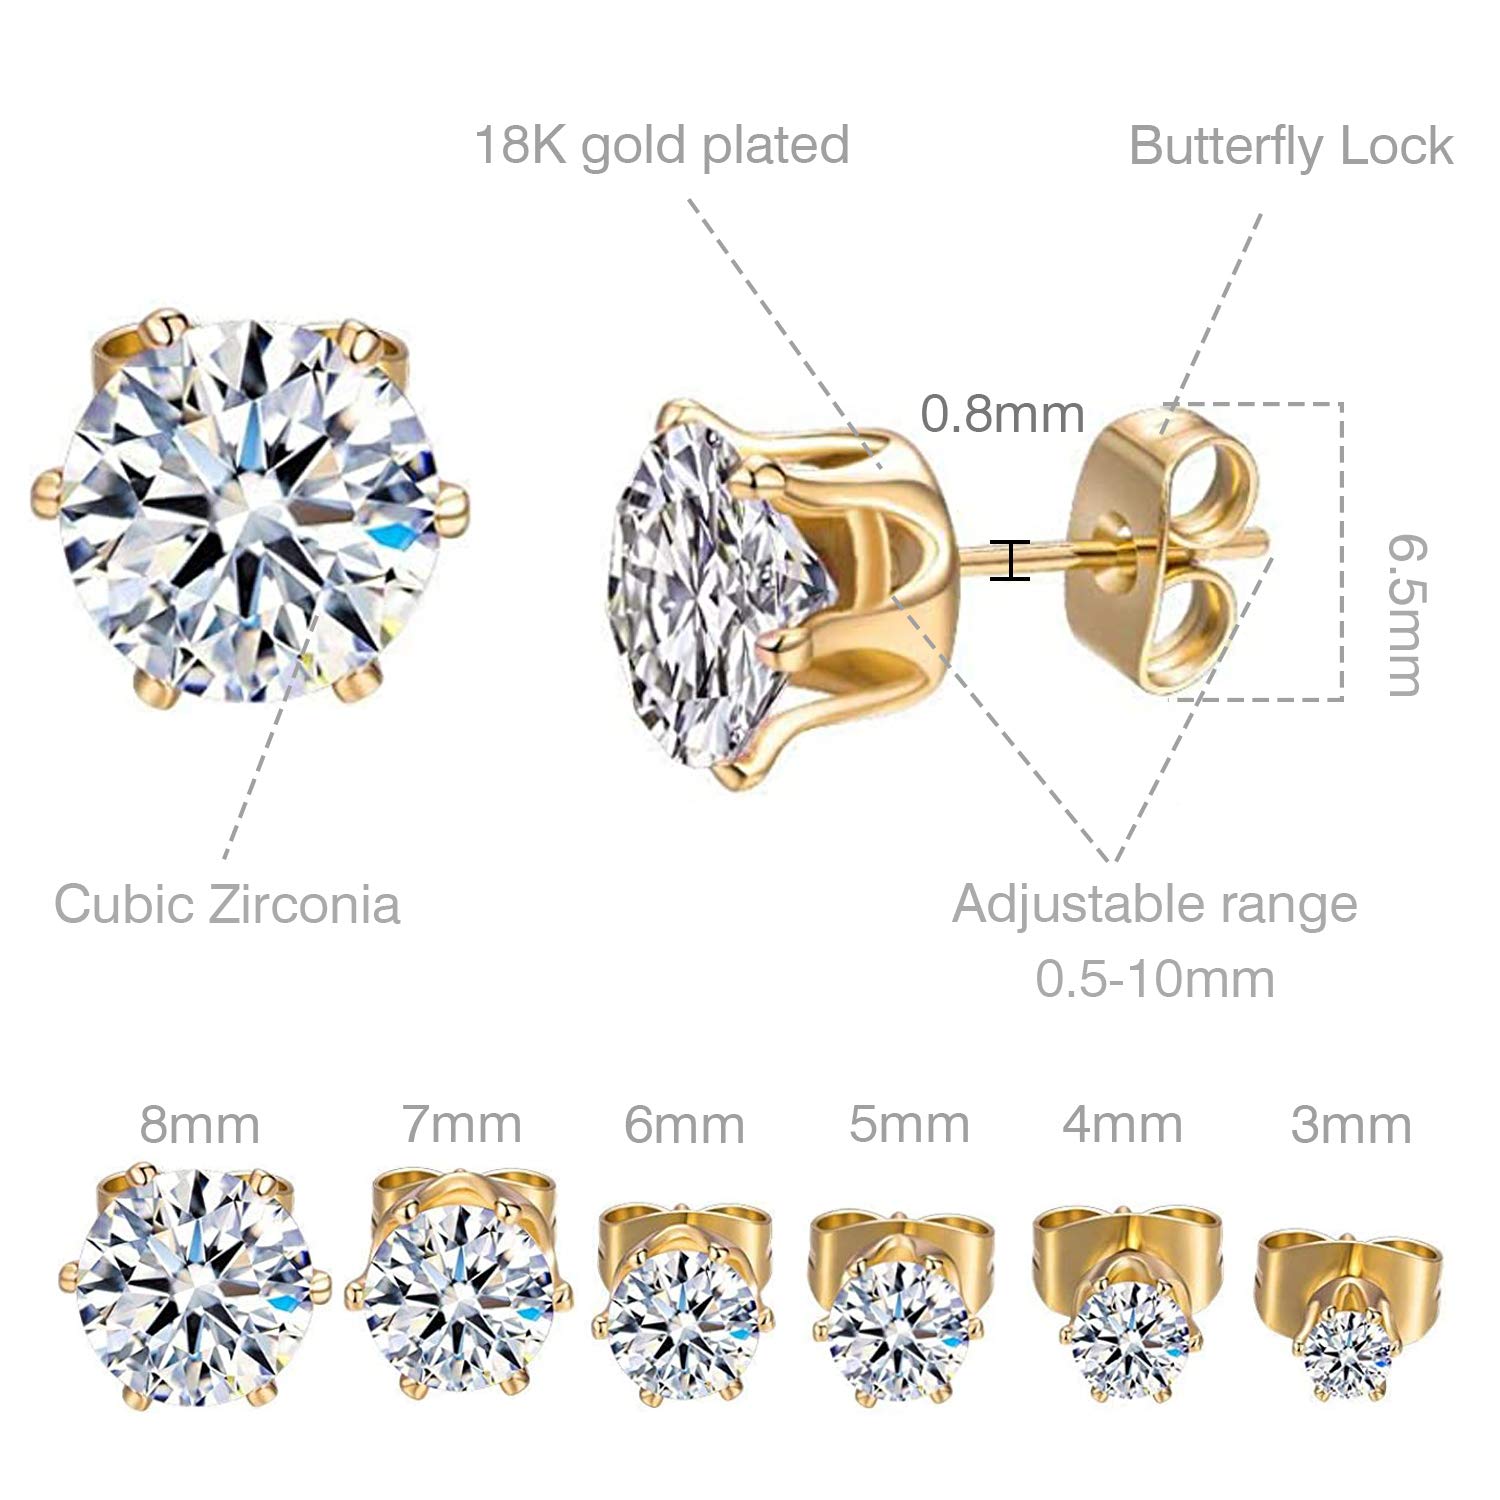 GEMSME 18K Yellow/White Gold Plated Round Cubic Zirconia Stud Earrings Pack of 6